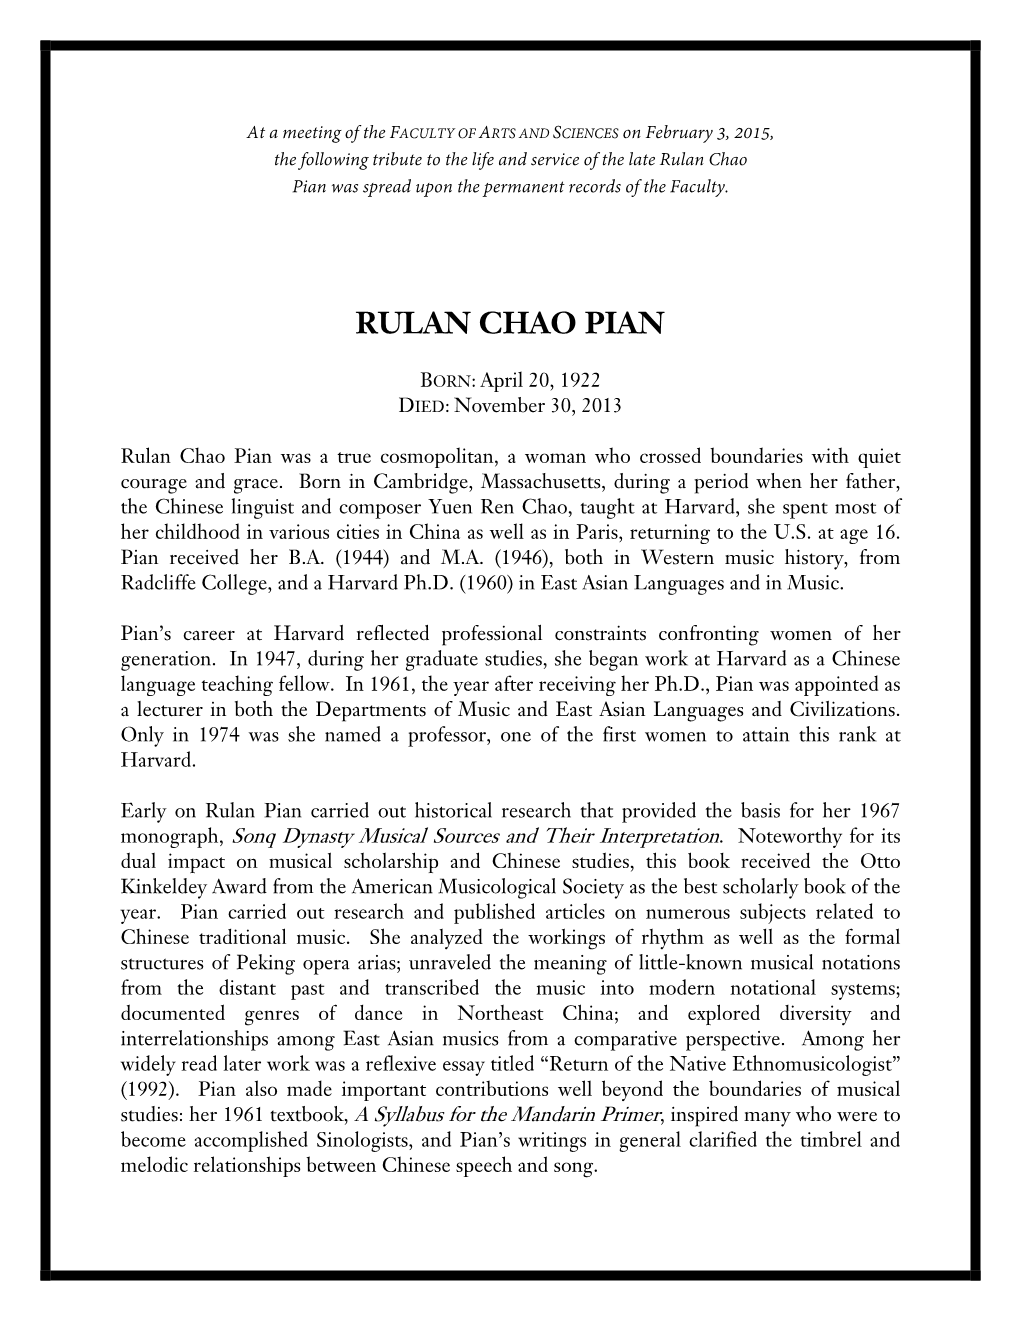 Rulan Chao Pian Was Spread Upon the Permanent Records of the Faculty